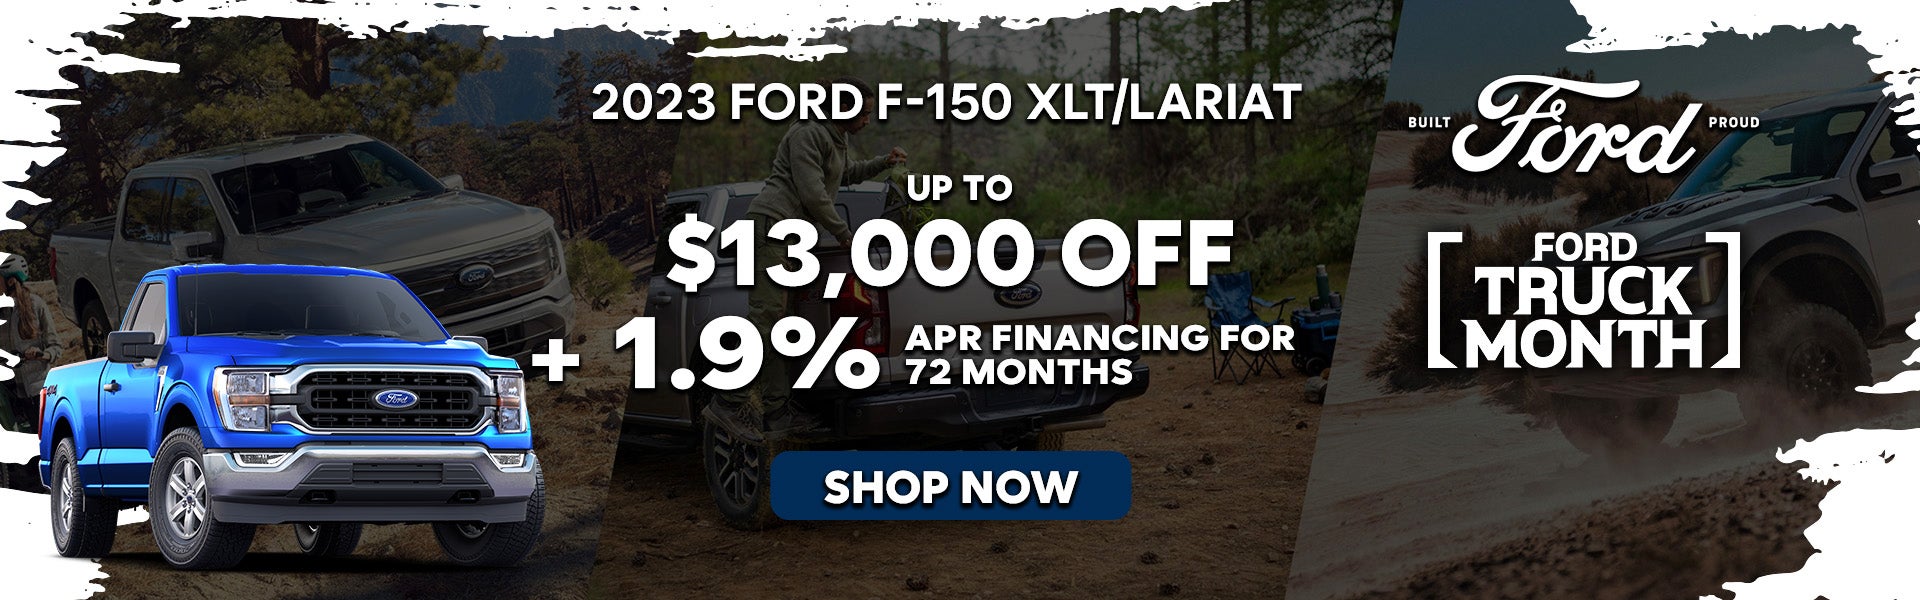 2023 Ford F-150 XLT/Lariat Special Offer